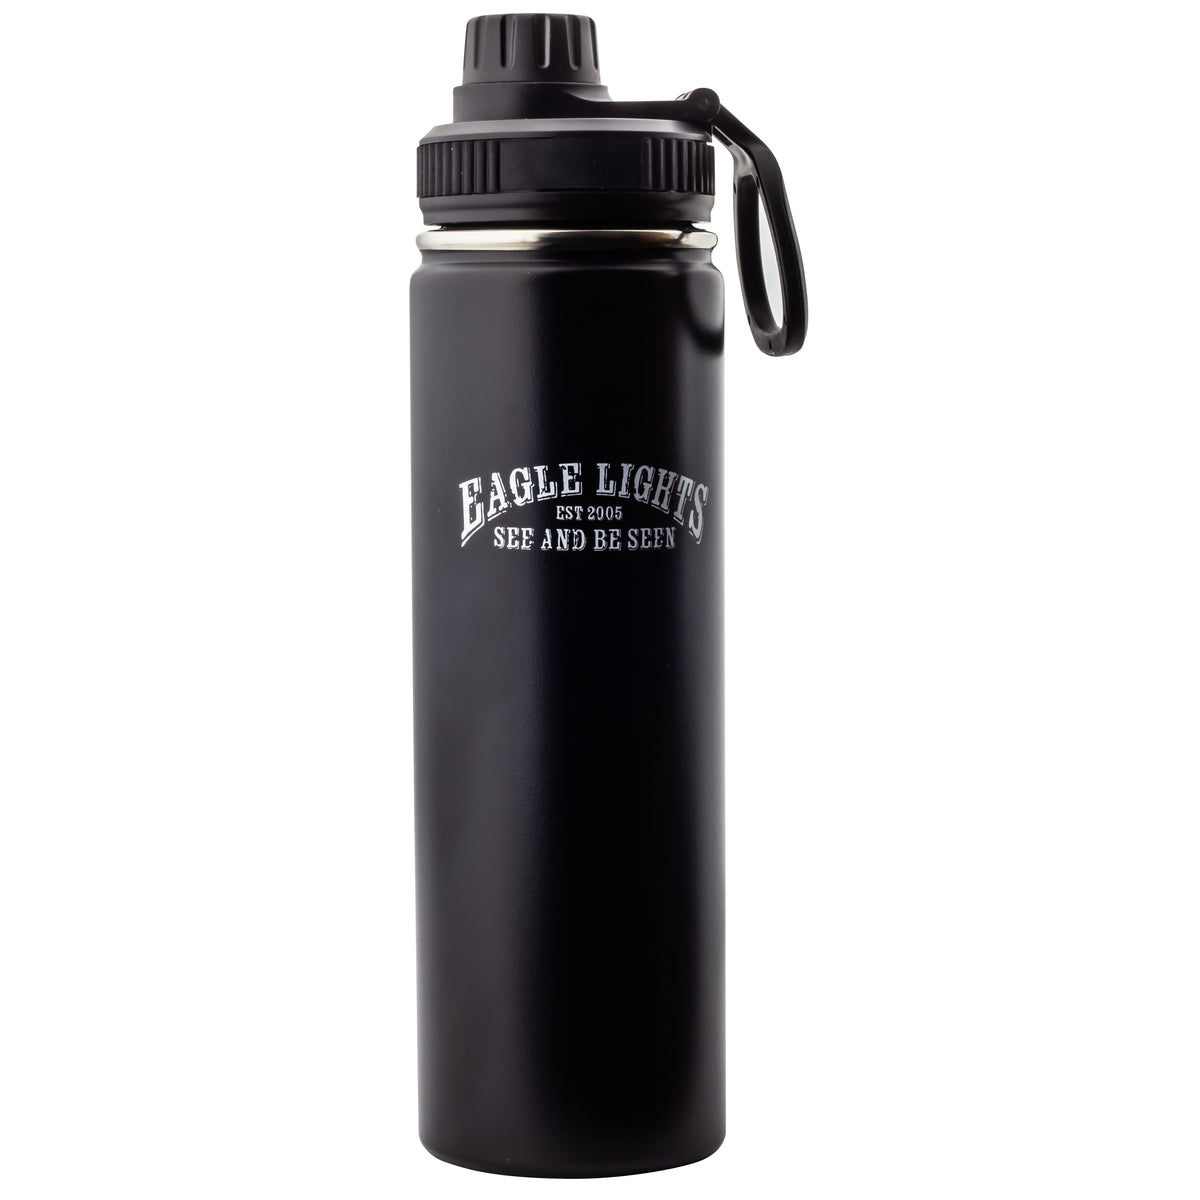 Eagle Lights 22 Oz Leak Proof Vacuum Insulated Stainless Steel Drink Bottle Thermos